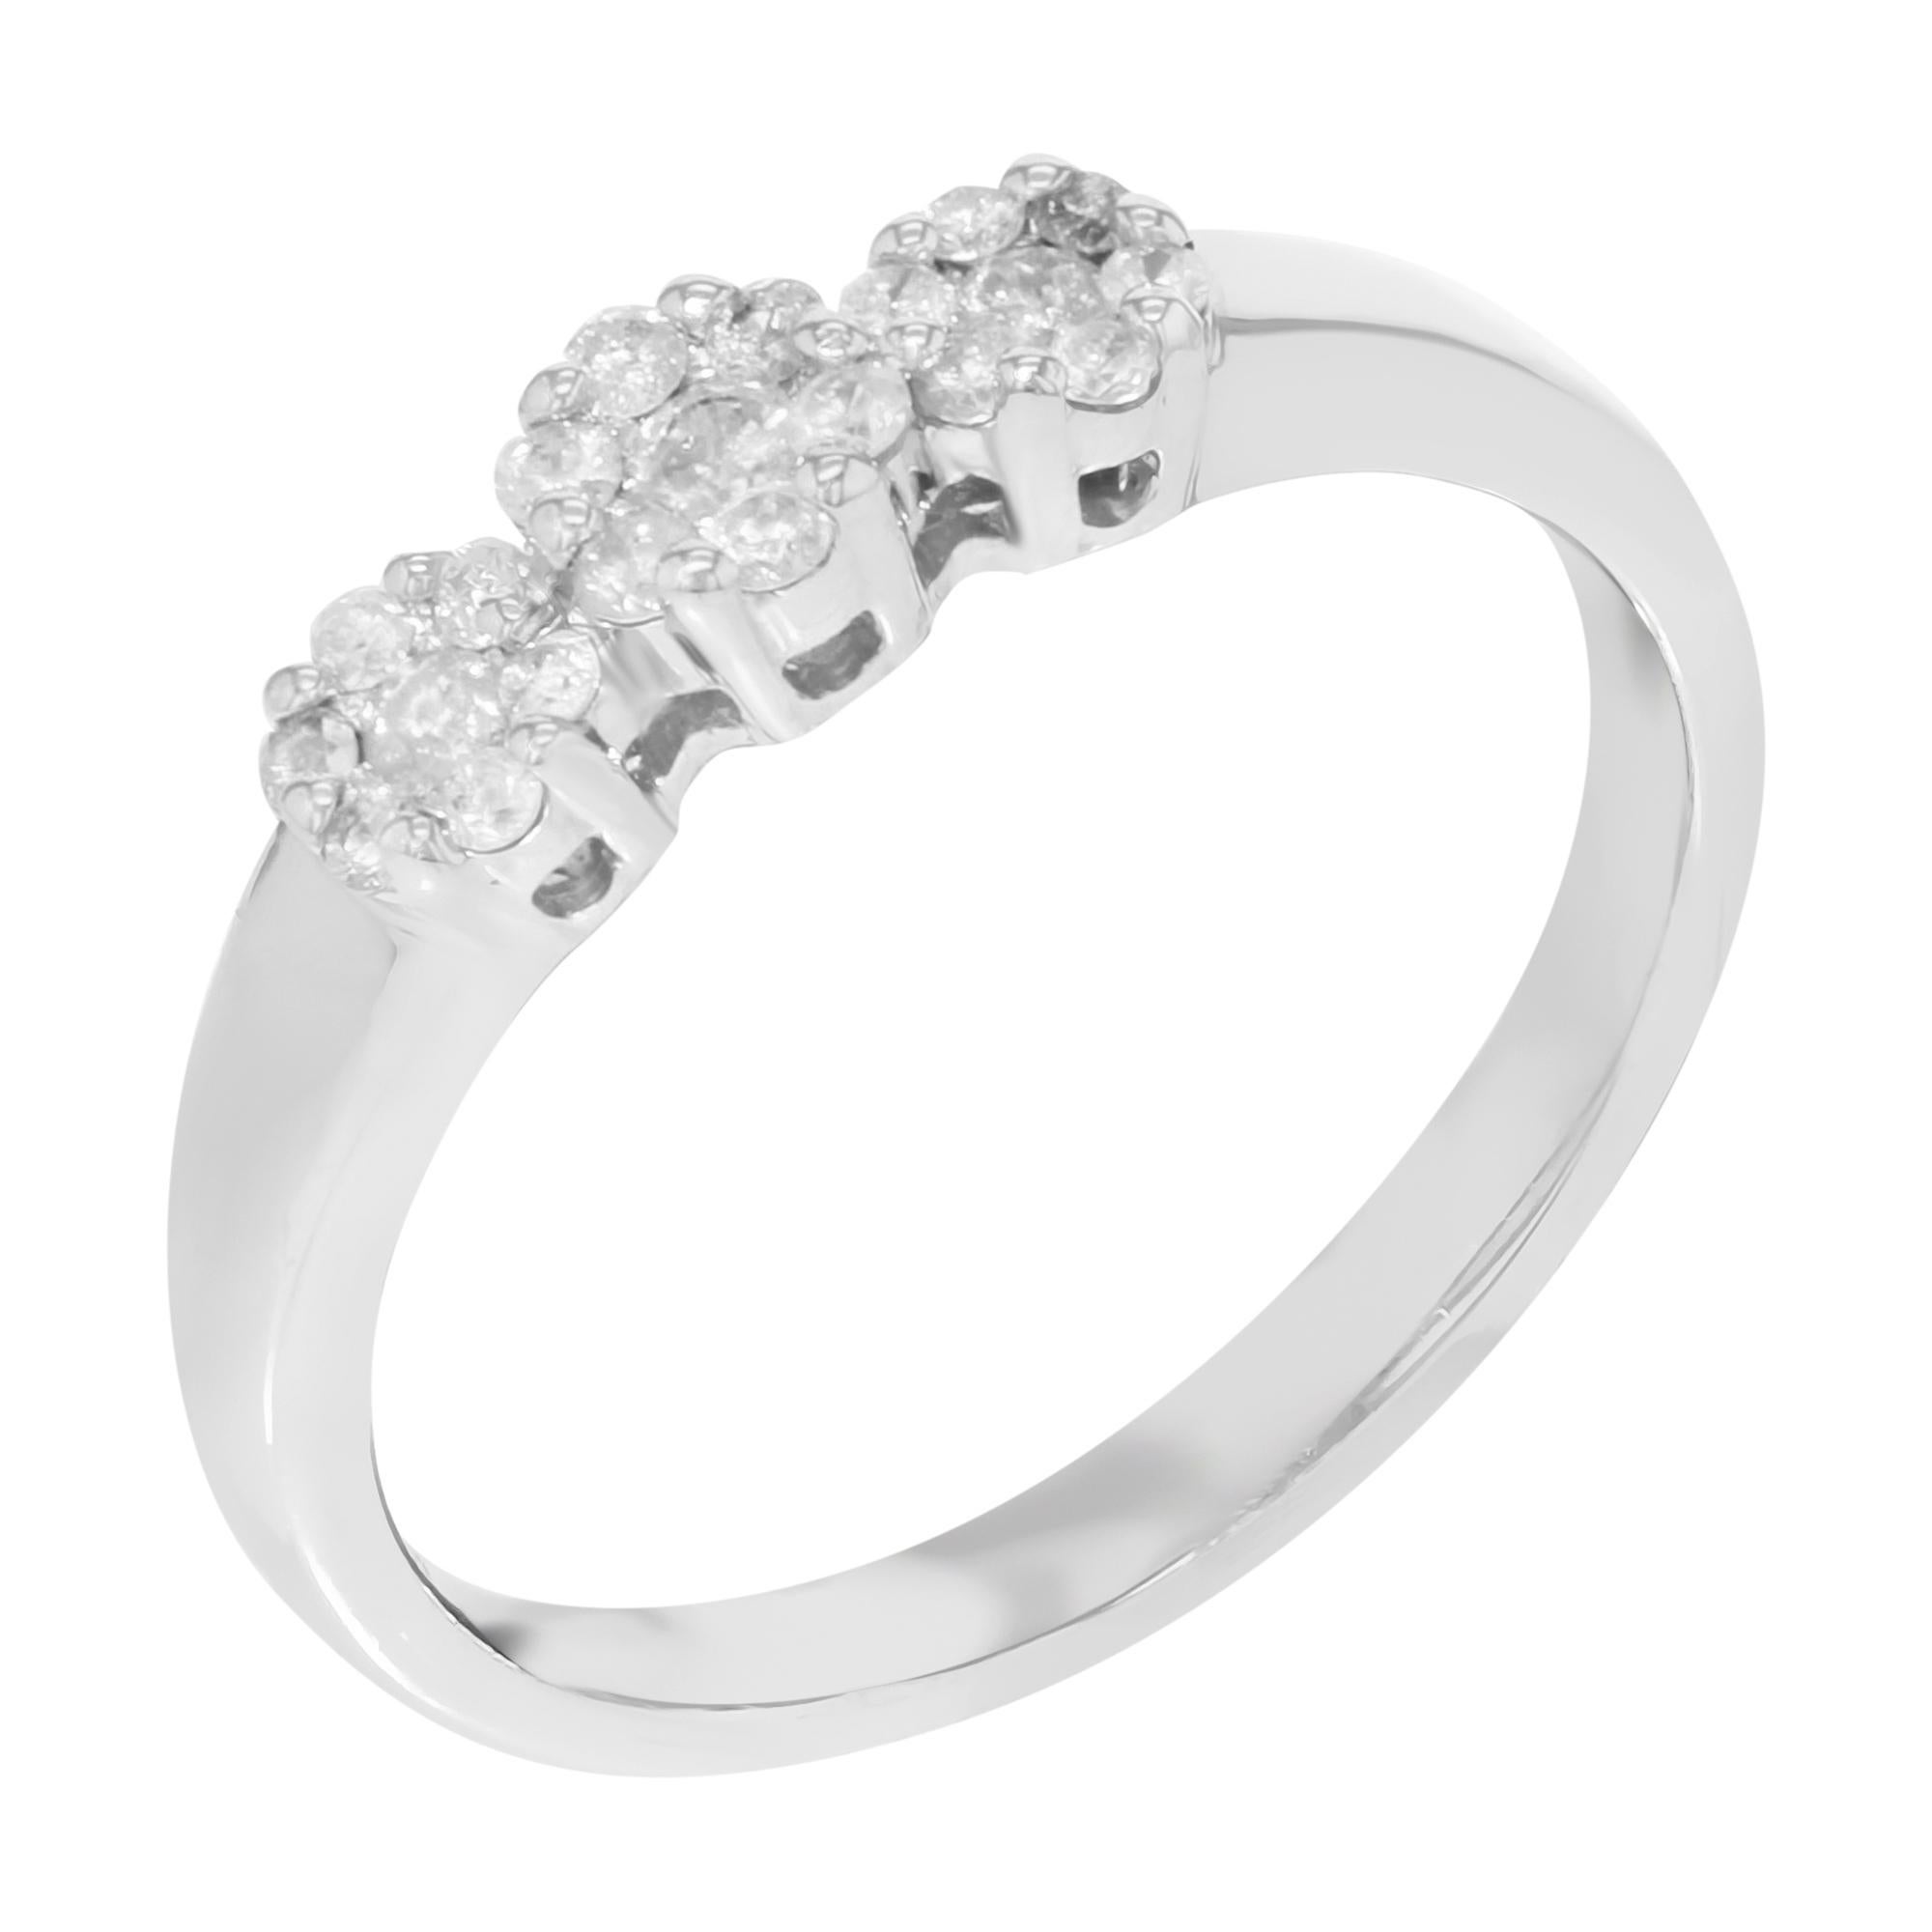 This three round cluster ring is crafted in 14k white gold and encrusted with approx. 0.37cttw diamonds. The size of the ring is 7, with a total weight of 2.3 gms. Brilliant round cut diamonds spread elegantly across the finger. Three round cluster